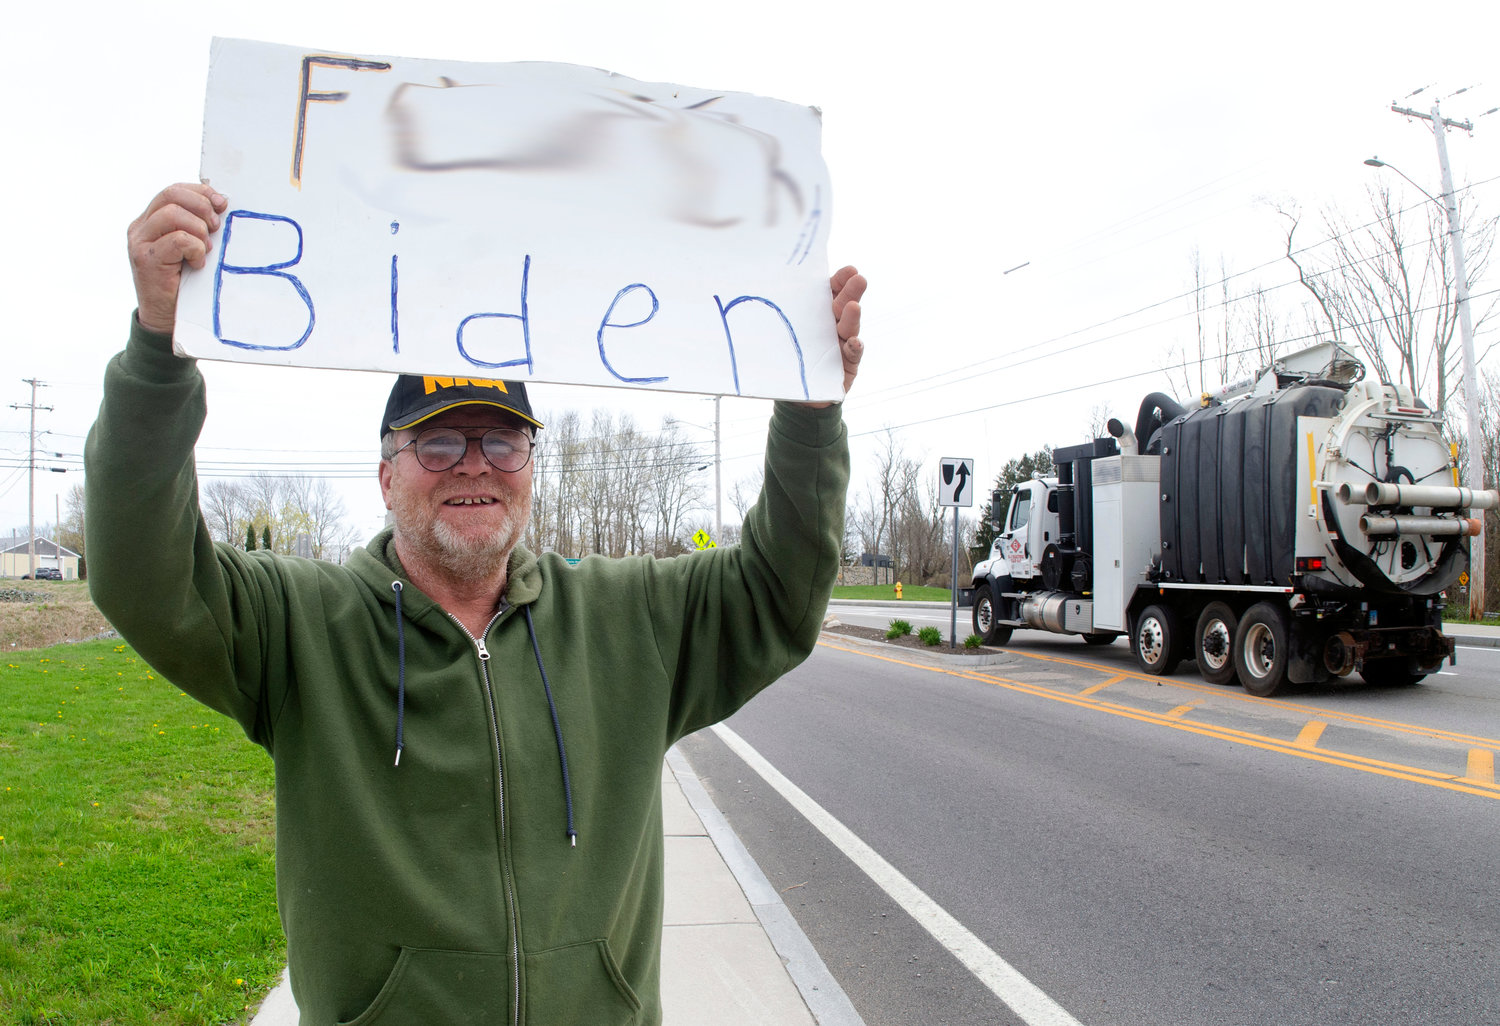 Tiverton Budget Committee member Joseph Sousa protests against President Joe Biden Monday in front of Stateline Tobacco on Stafford Road. Note: portions of his sign have been blurred electronically.